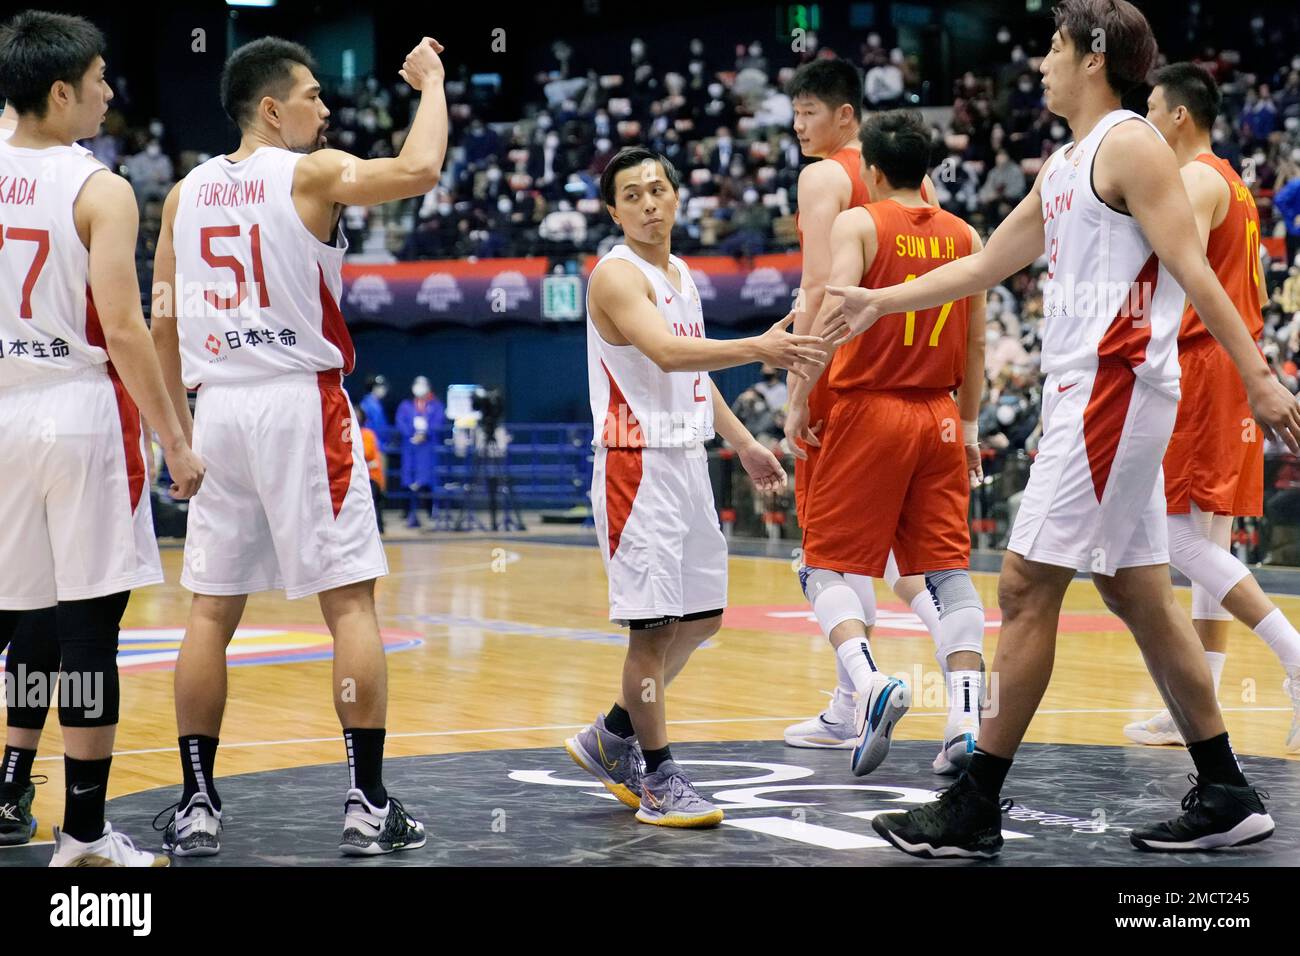 Preview: China looking for good showing at home FIBA World Cup